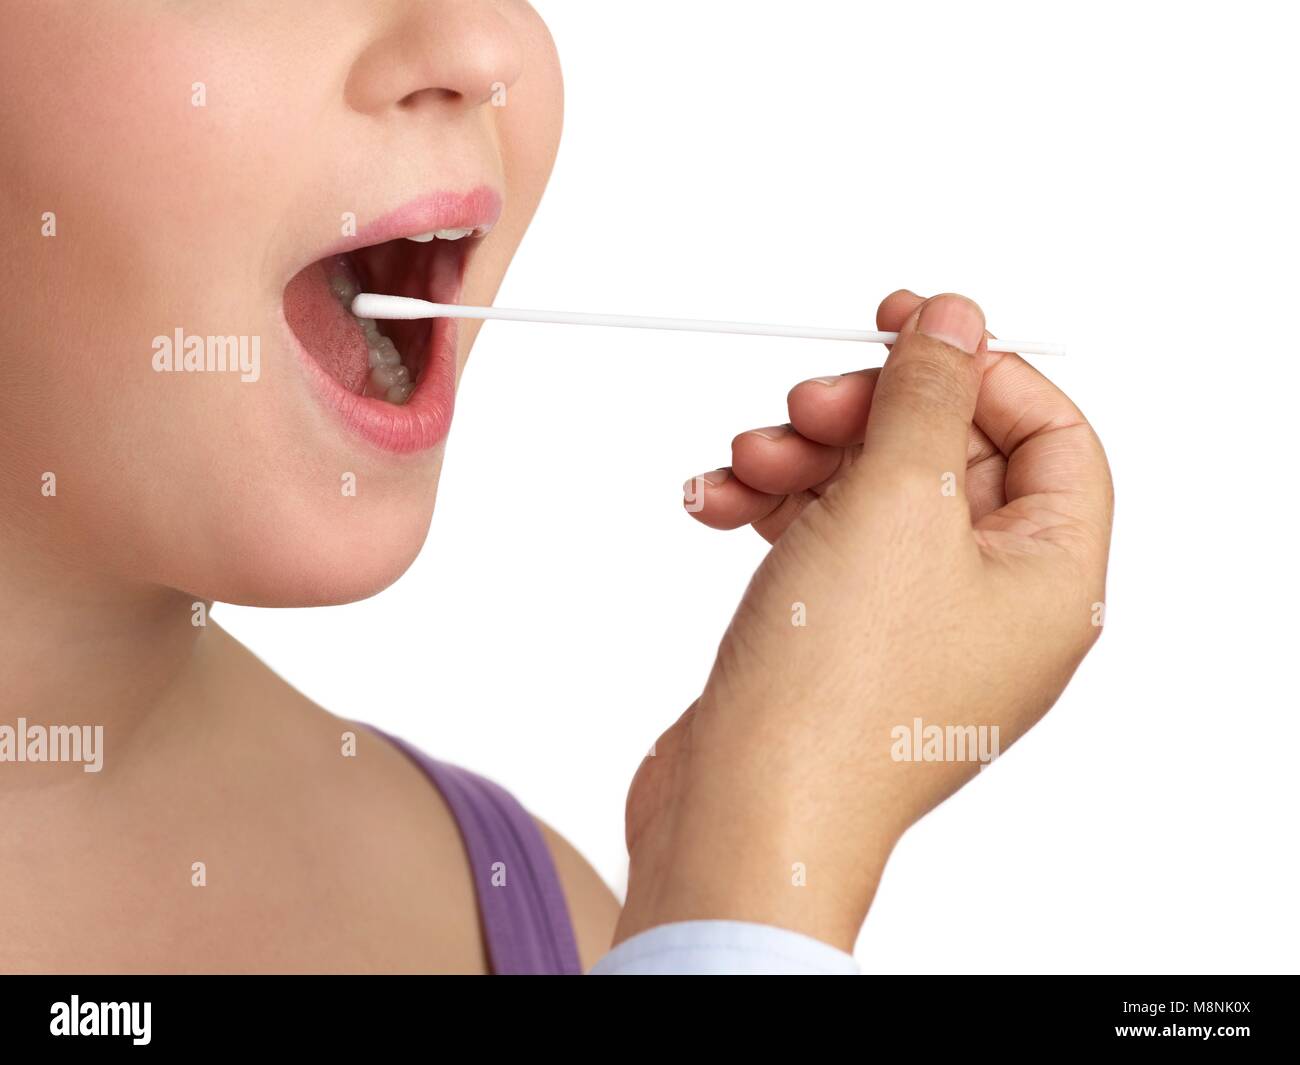 Doctor taking a swab from a woman's mouth. Stock Photo